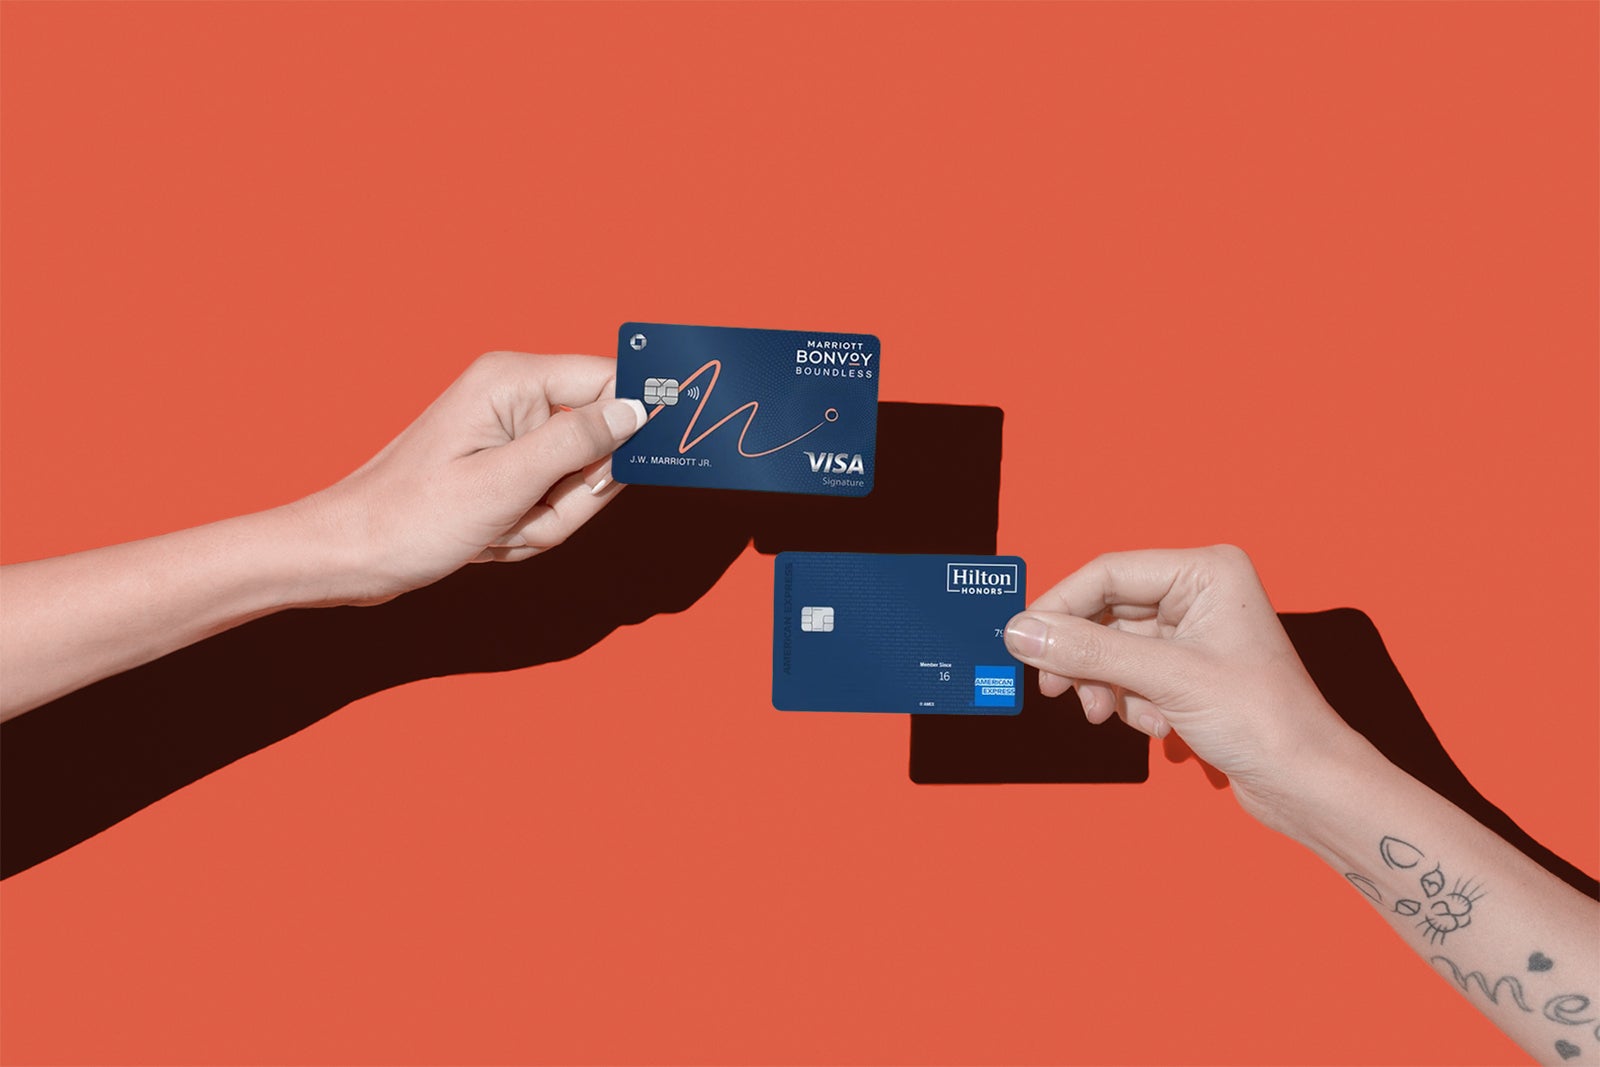 You are currently viewing Marriott Bonvoy Boundless vs. Hilton Amex Surpass: Which hotel card is better?